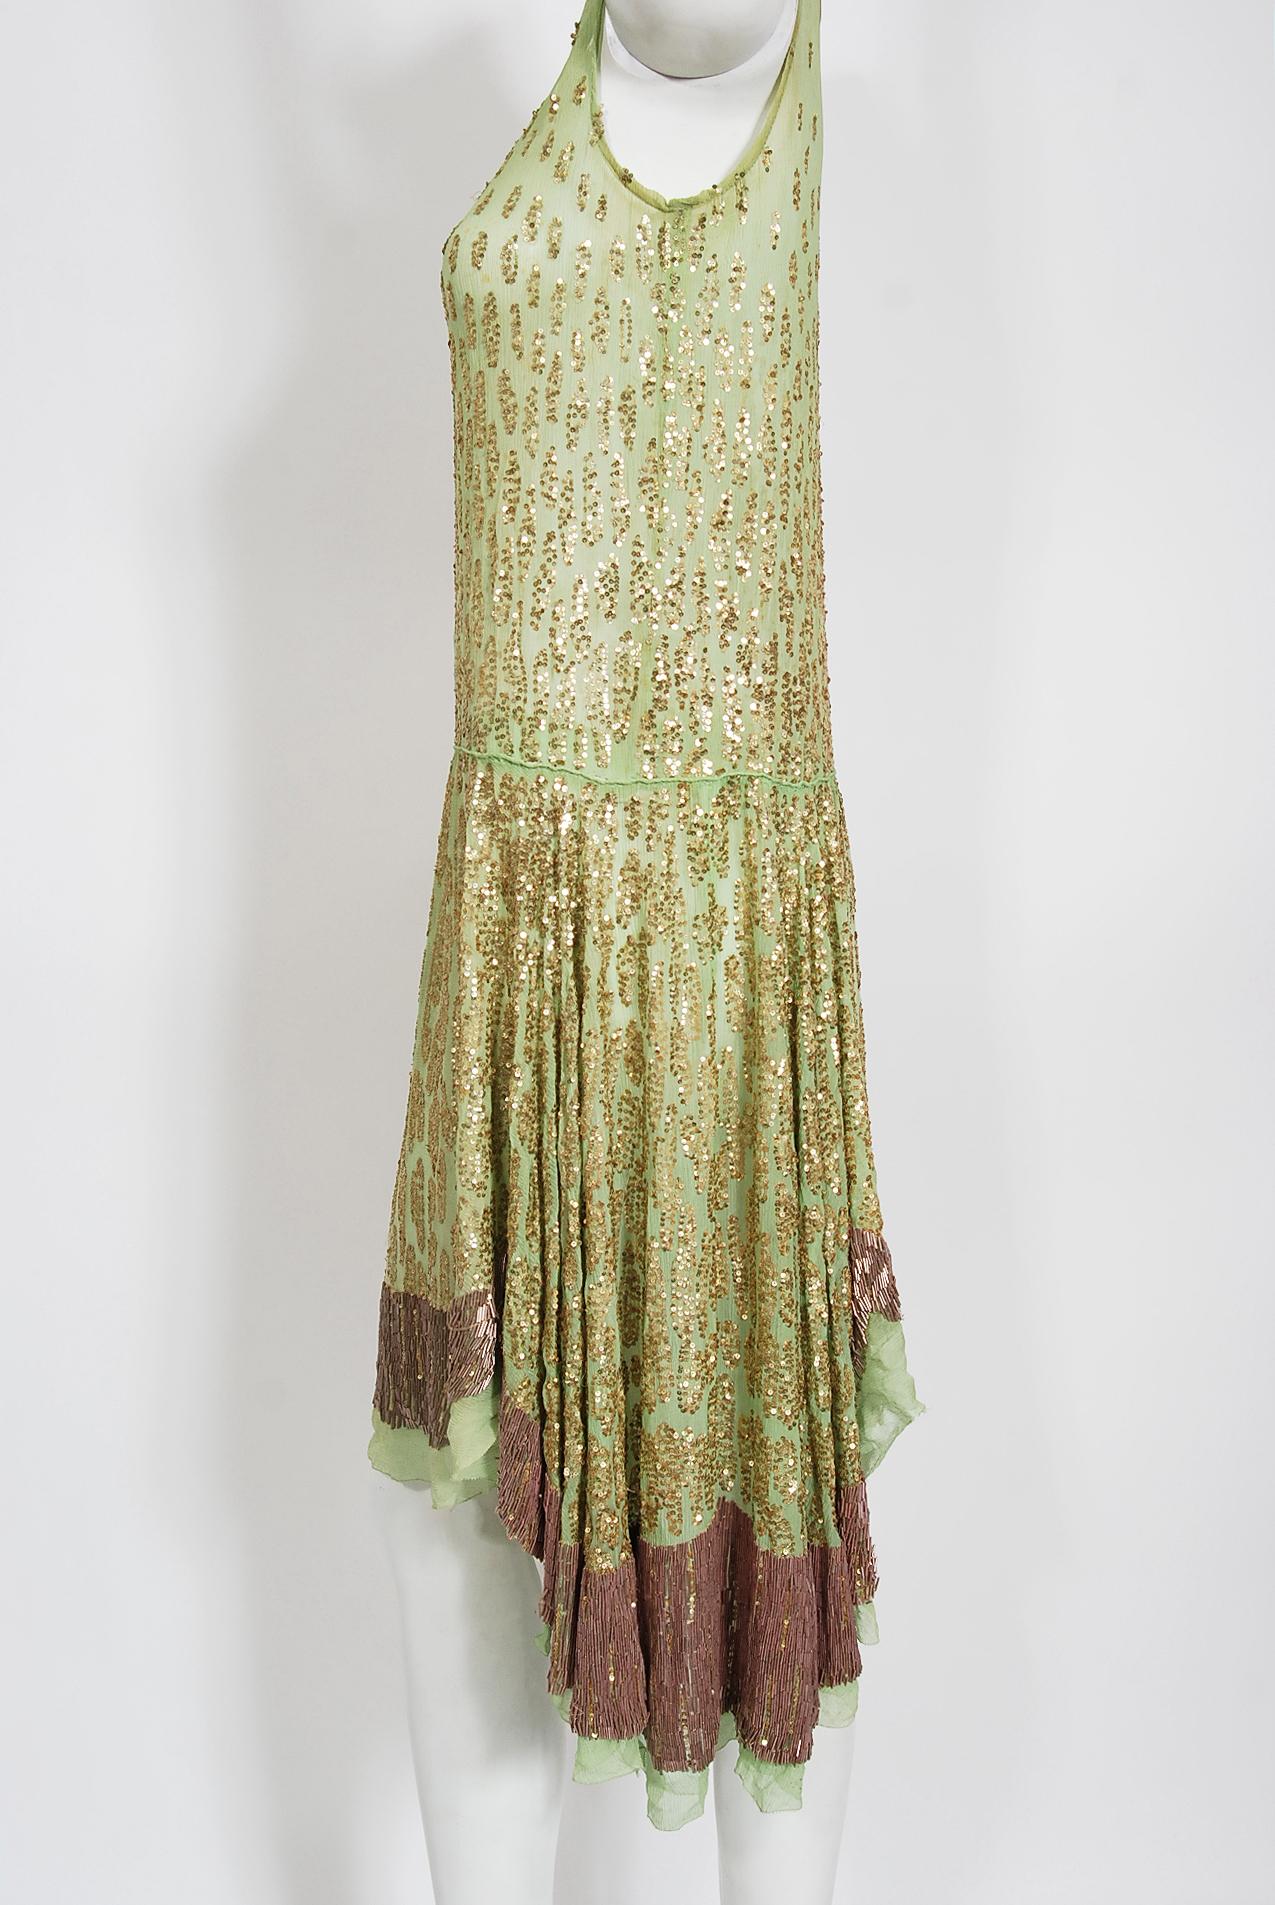 Vintage 1920's French Mint-Green Beaded Sequin Silk Chiffon Draped Flapper Dress In Good Condition For Sale In Beverly Hills, CA